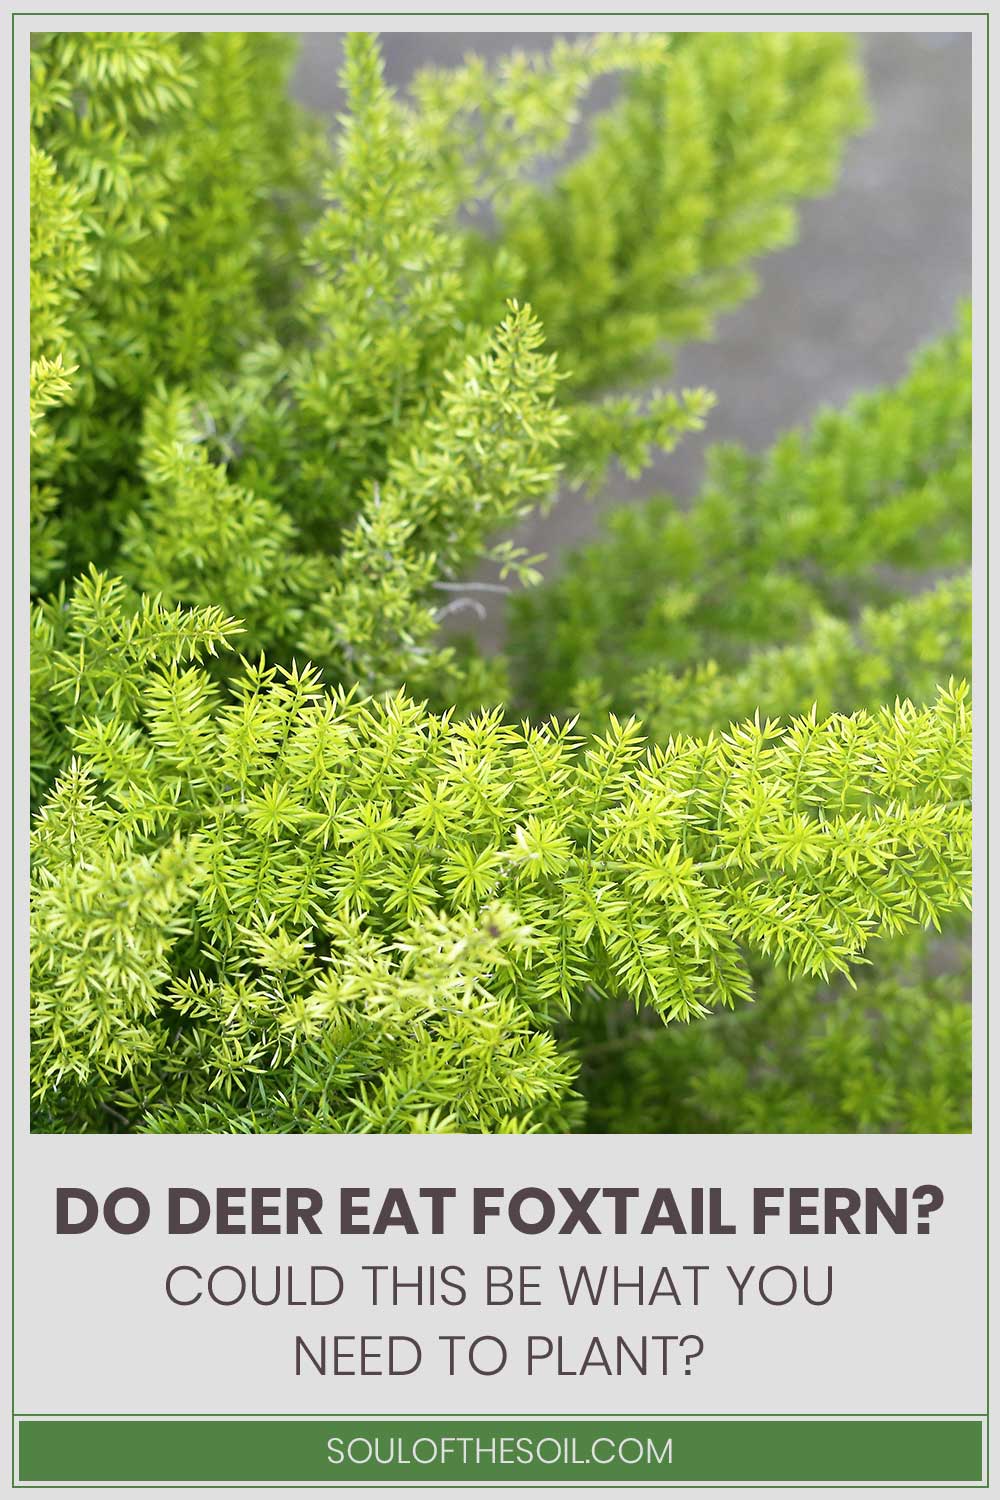 Do Deer Eat Foxtail Fern? Could This Be What You Need to Plant?